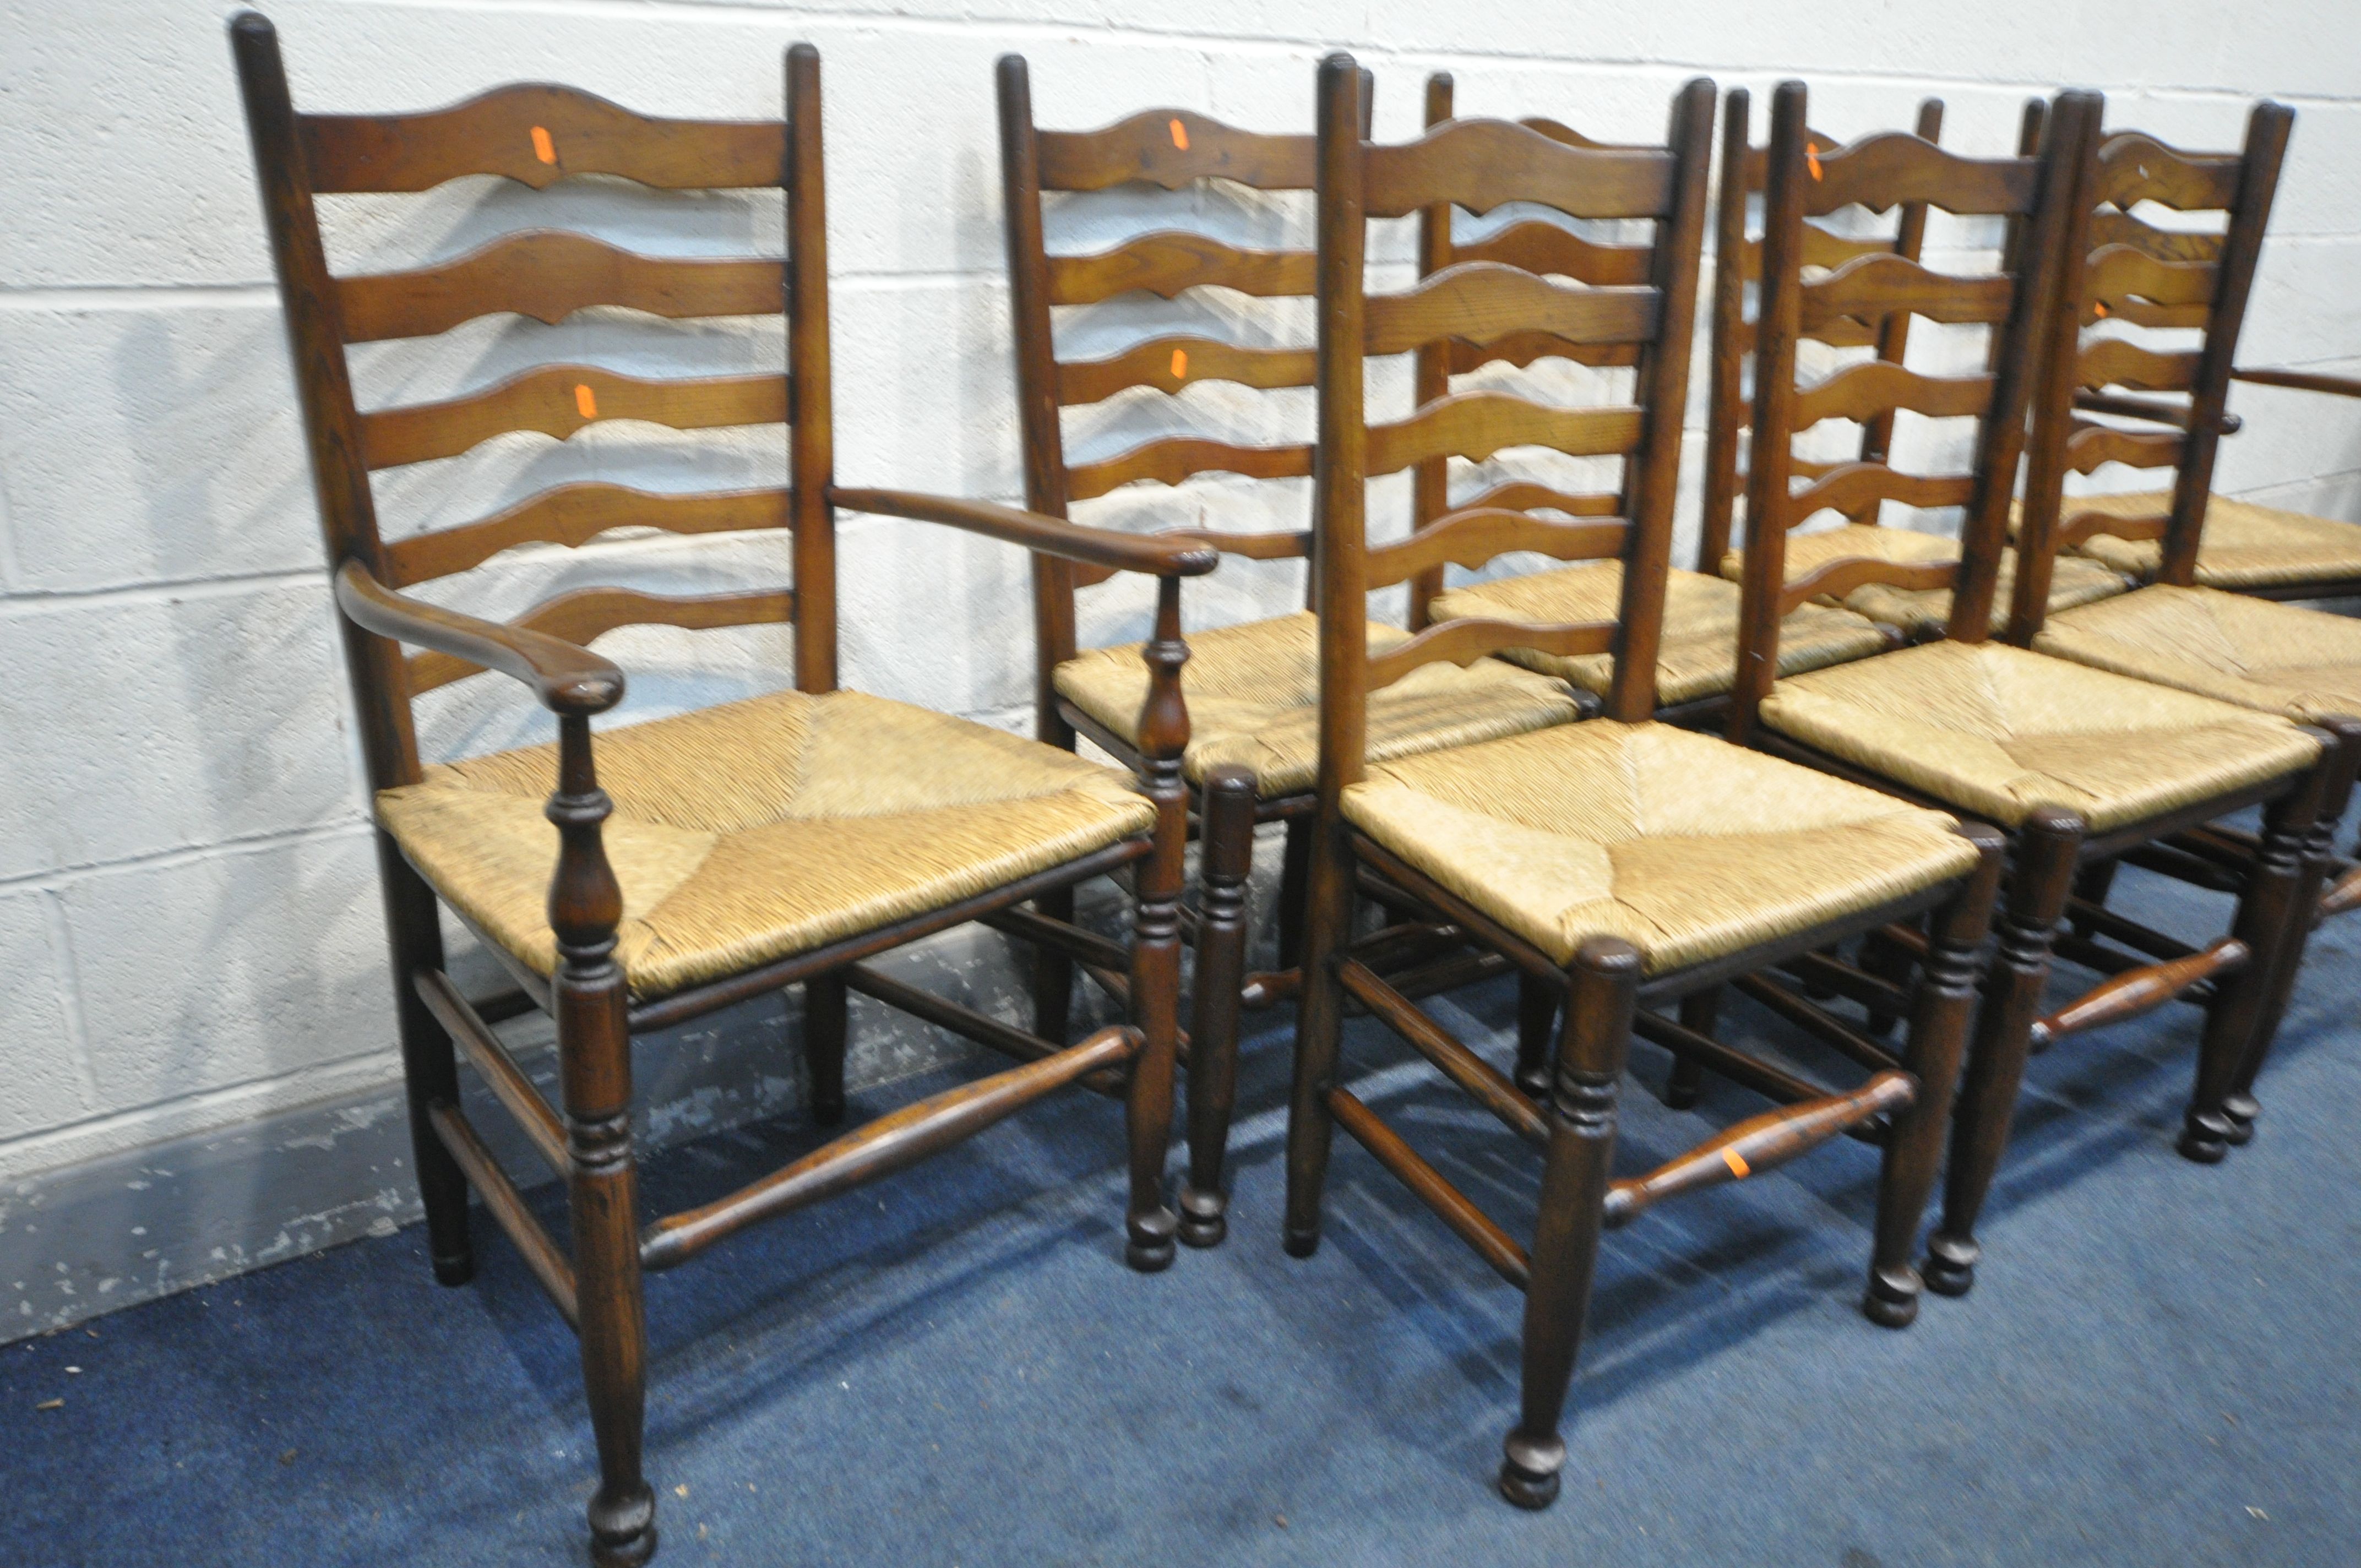 A SET OF EIGHT REPRODUCTION 19TH CENTURY STYLE OAK LANCASHIRE CHAIRS, with ladder backs and loose - Image 2 of 4